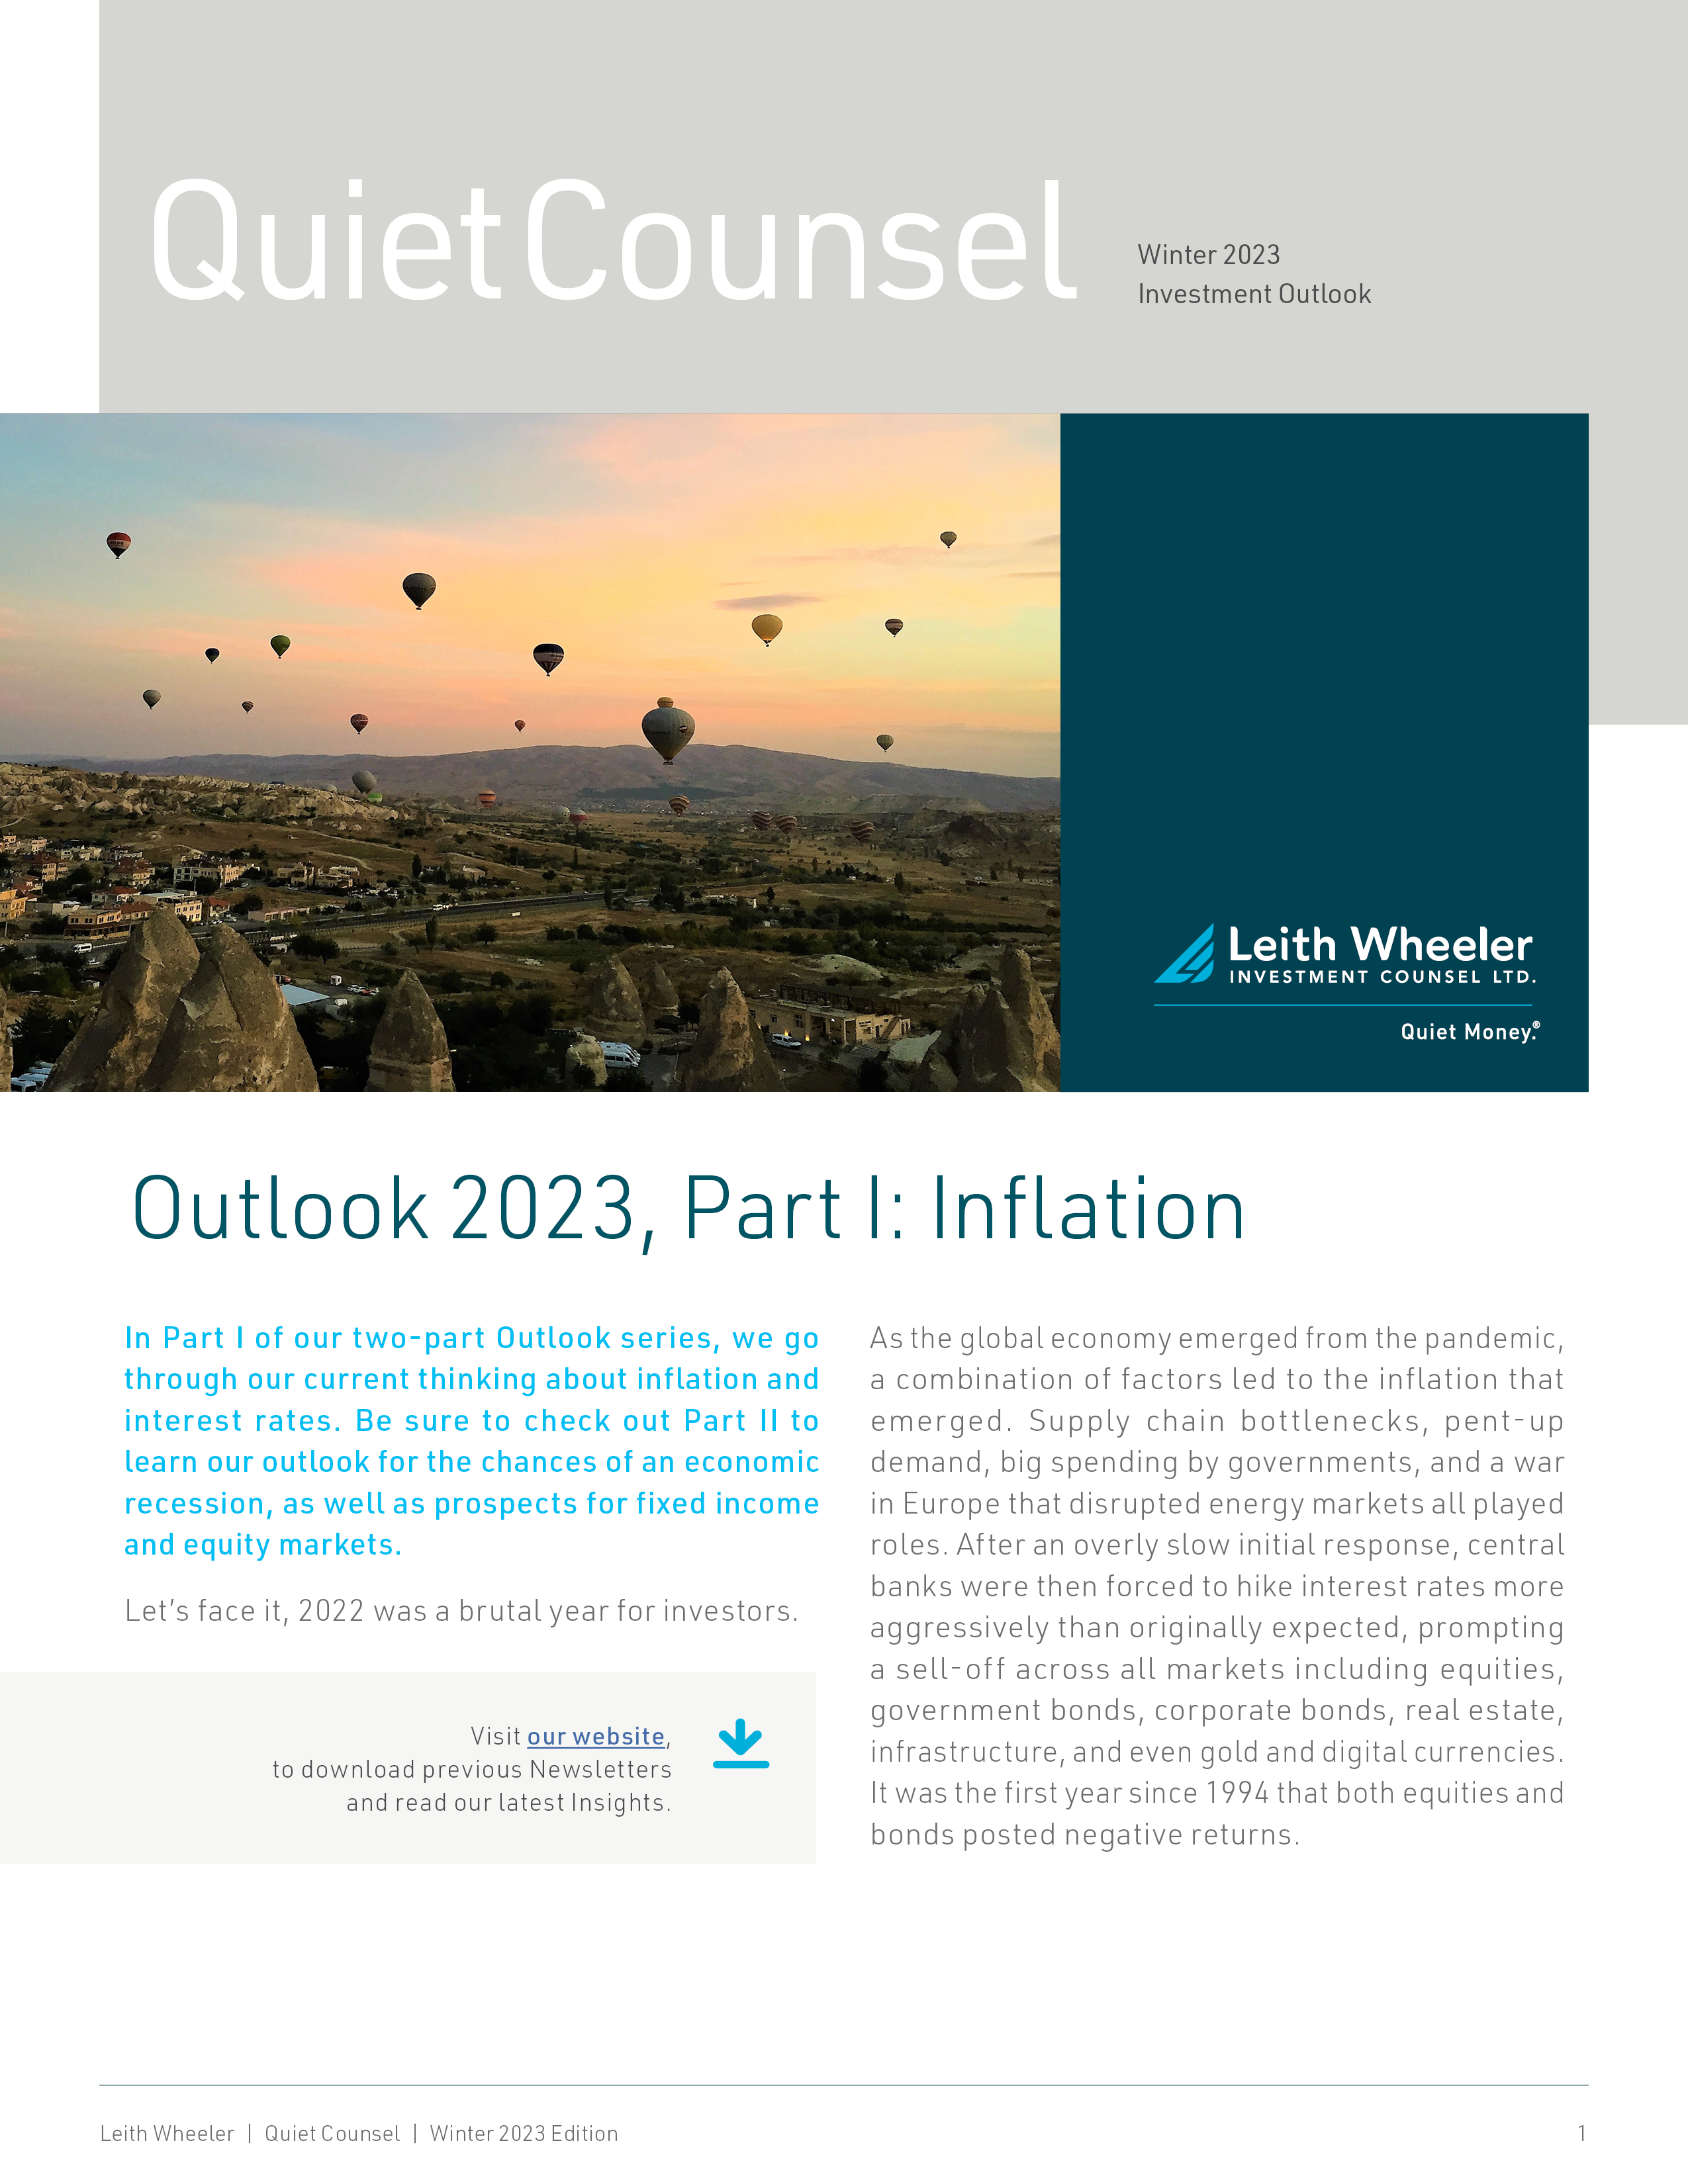 Outlook 2023, Part I Inflation